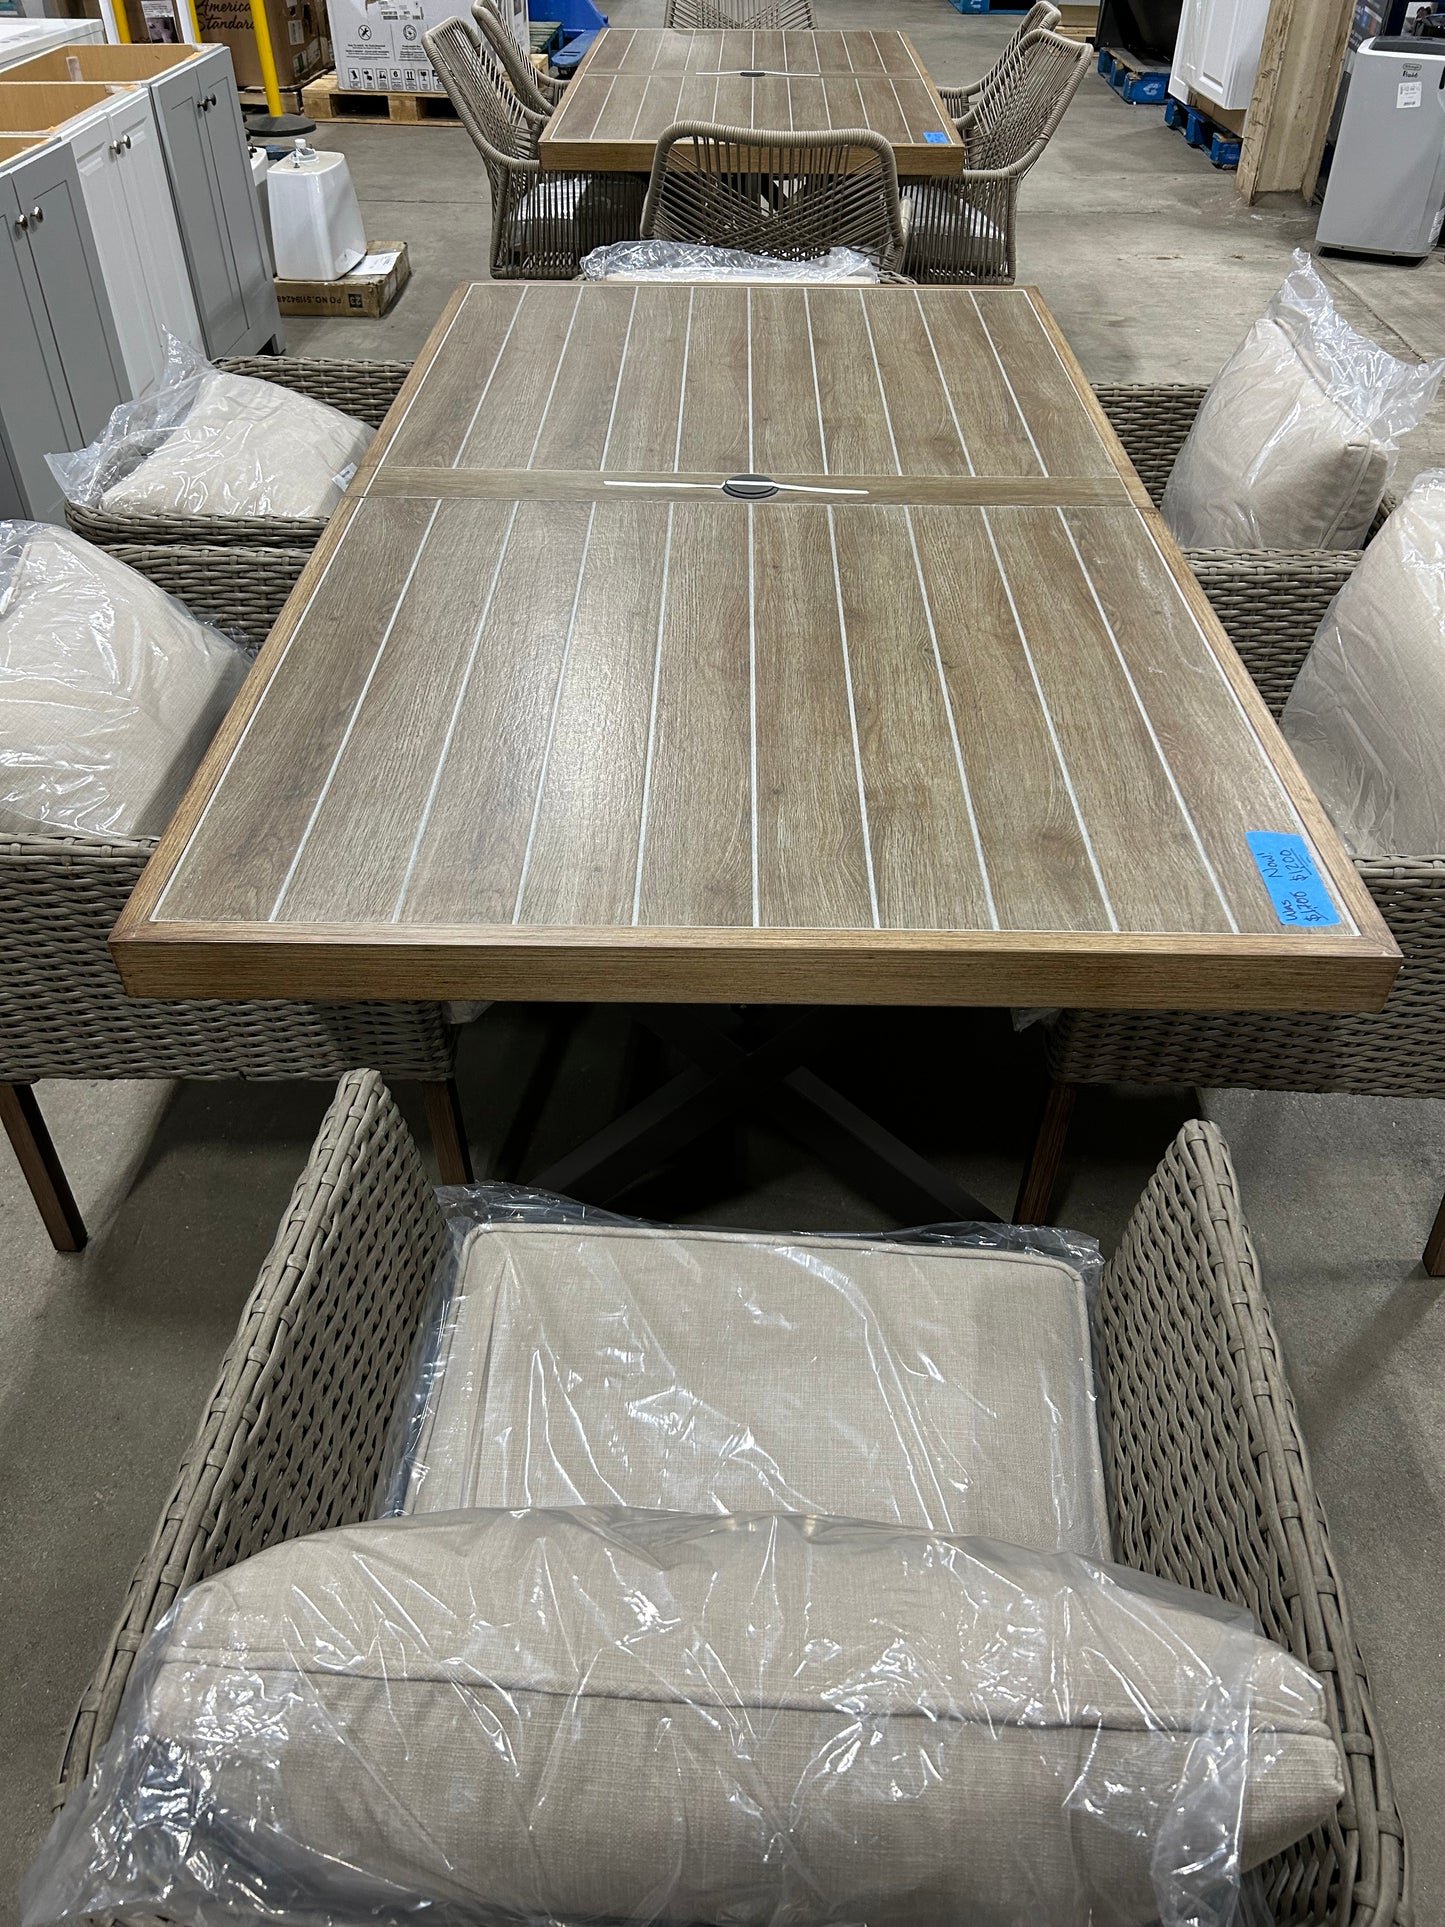 7 Piece Dining Set w/ Oakshire Chairs.